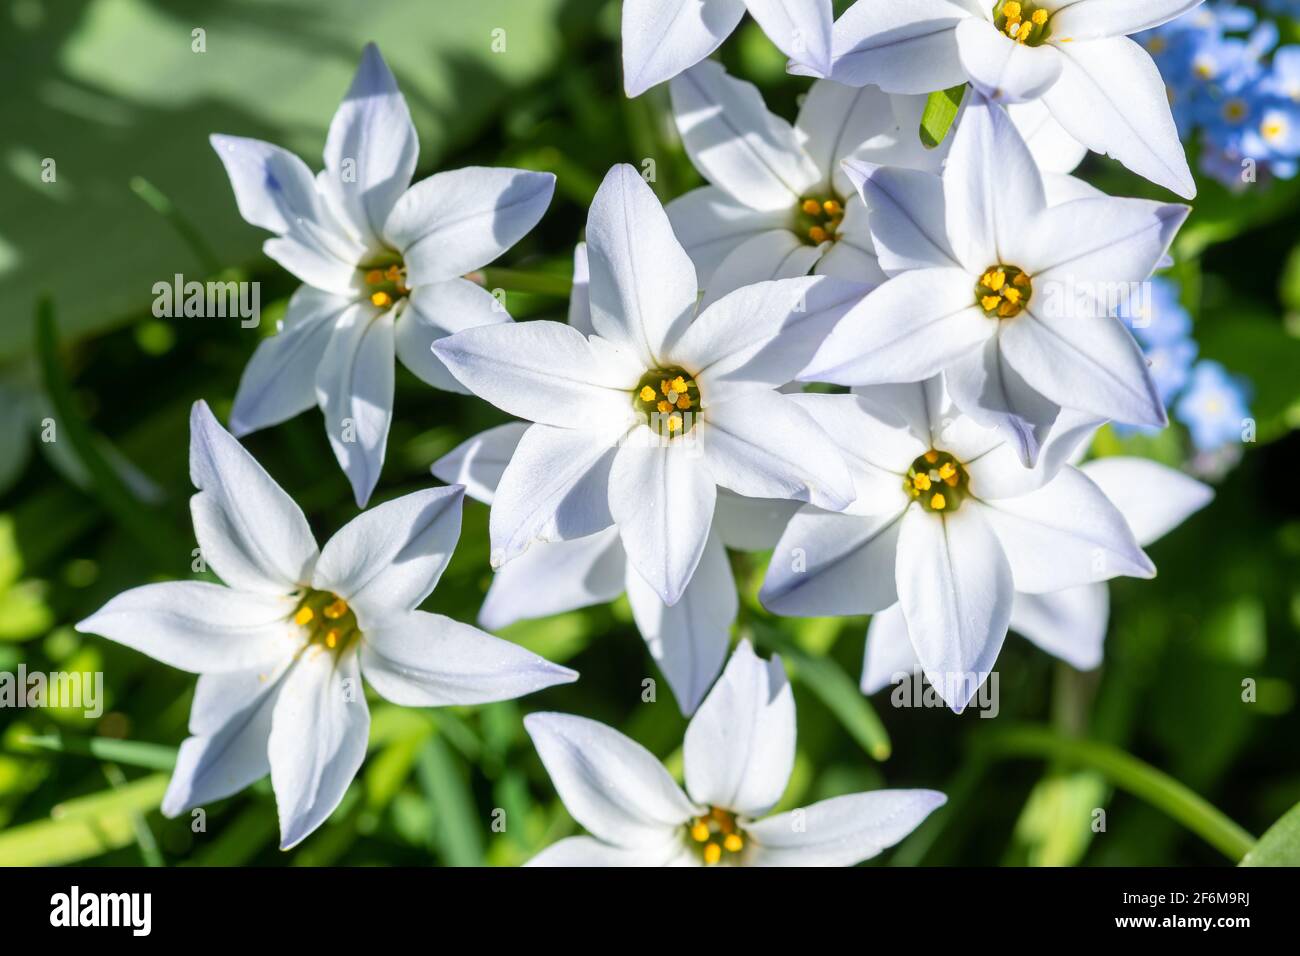 Ipheion uniflorum white star flowers, also called the spring starflower, during March, England, UK Stock Photo